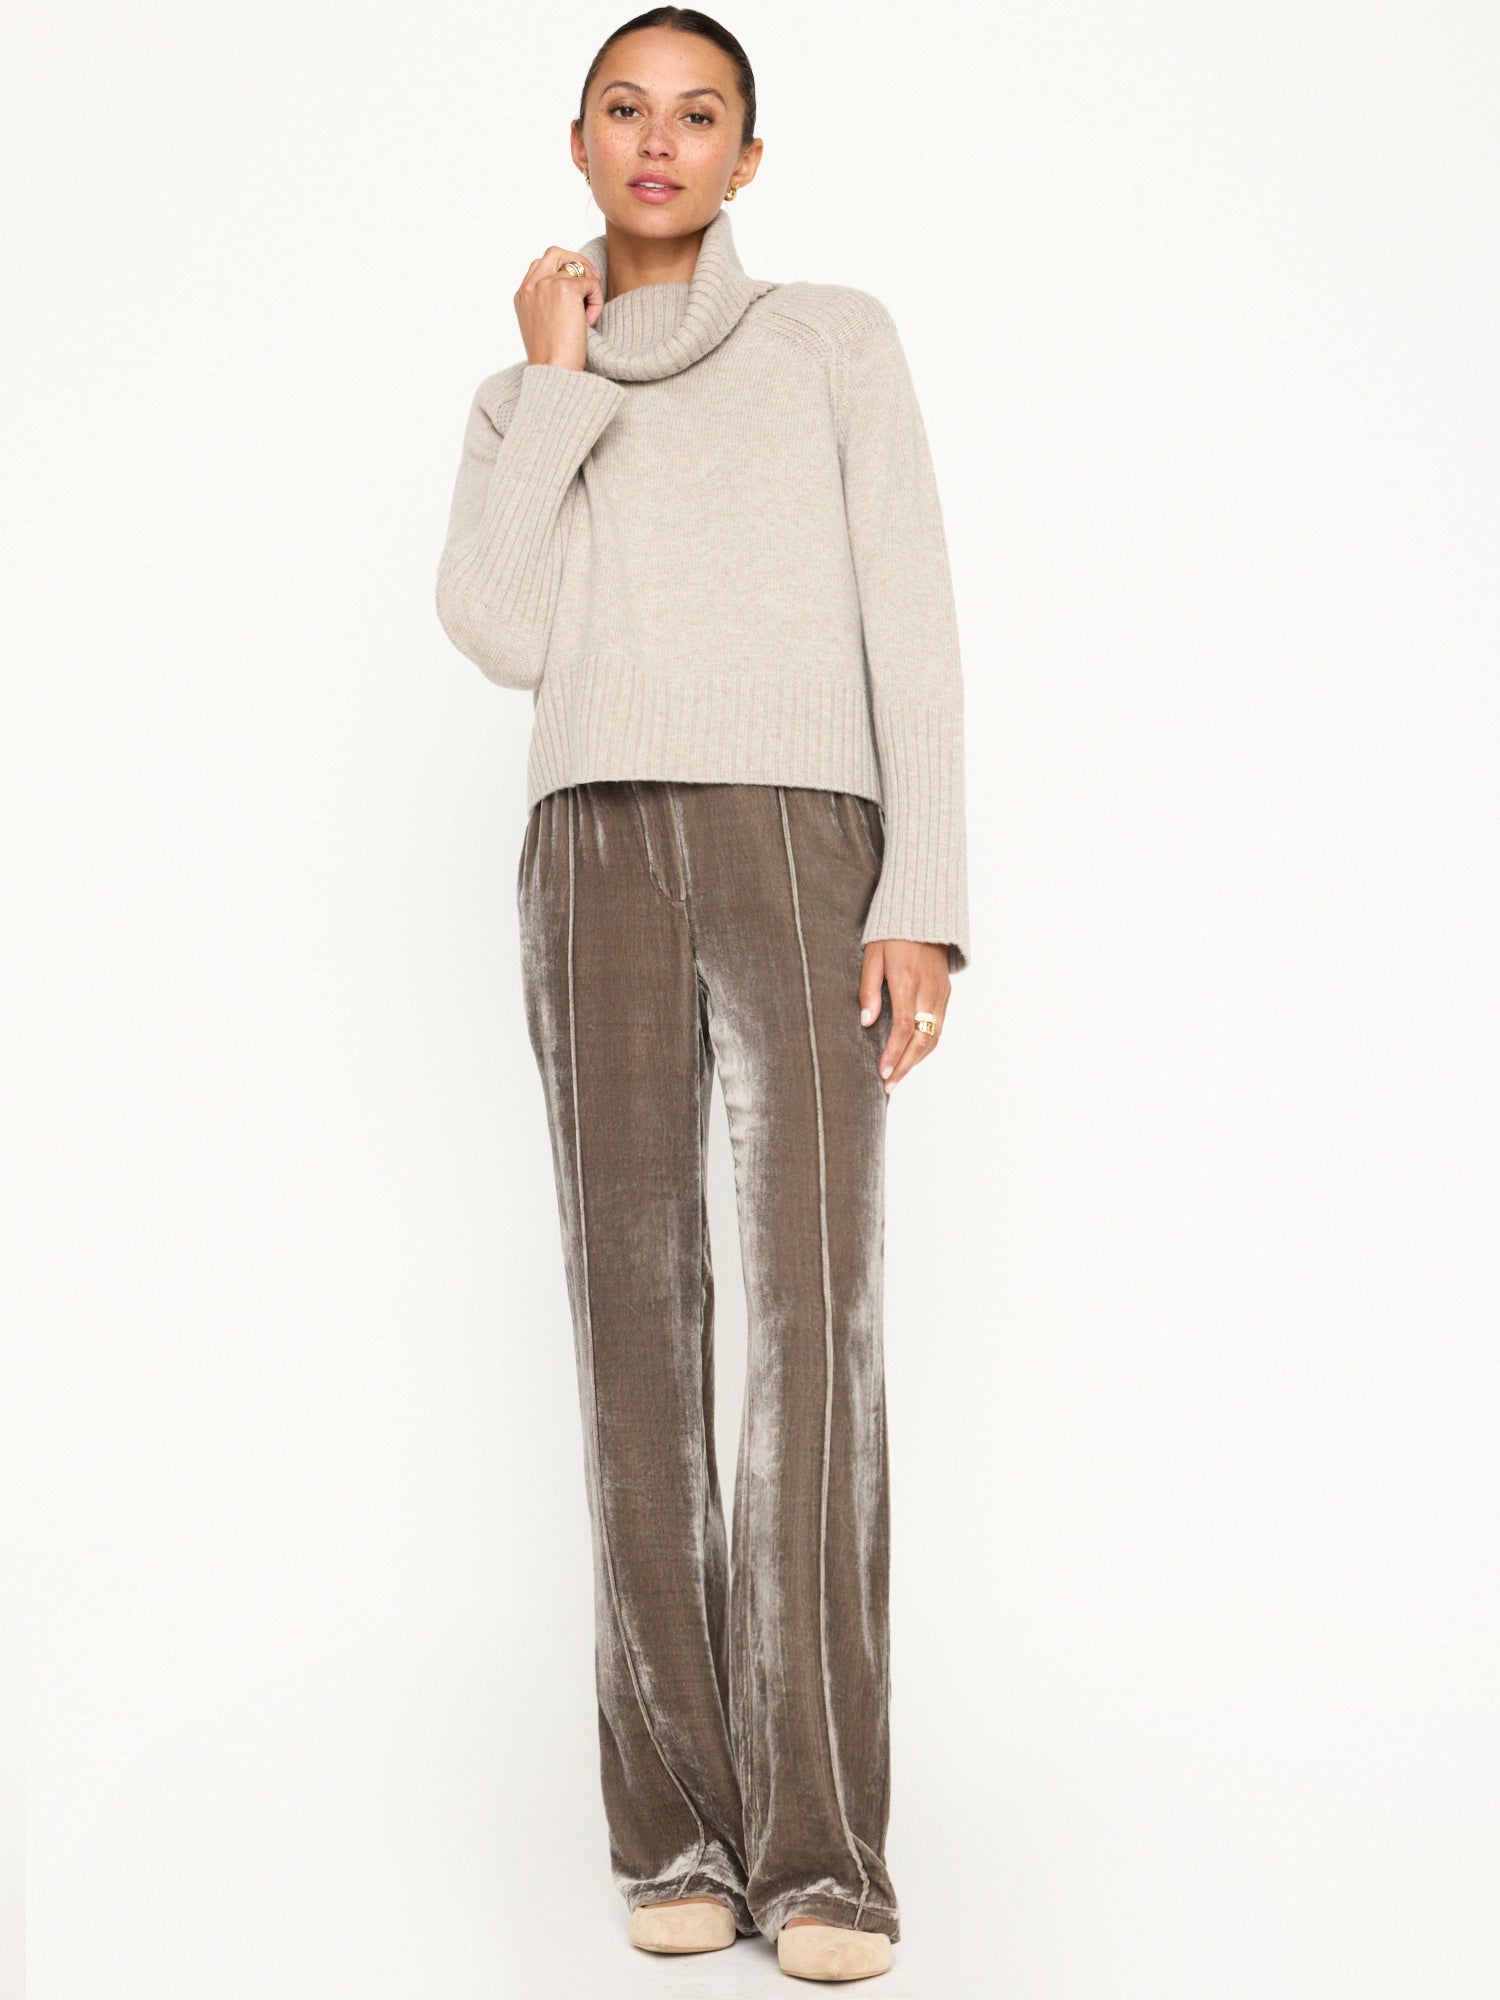 Orion cashmere-wool light grey turtleneck sweater full view